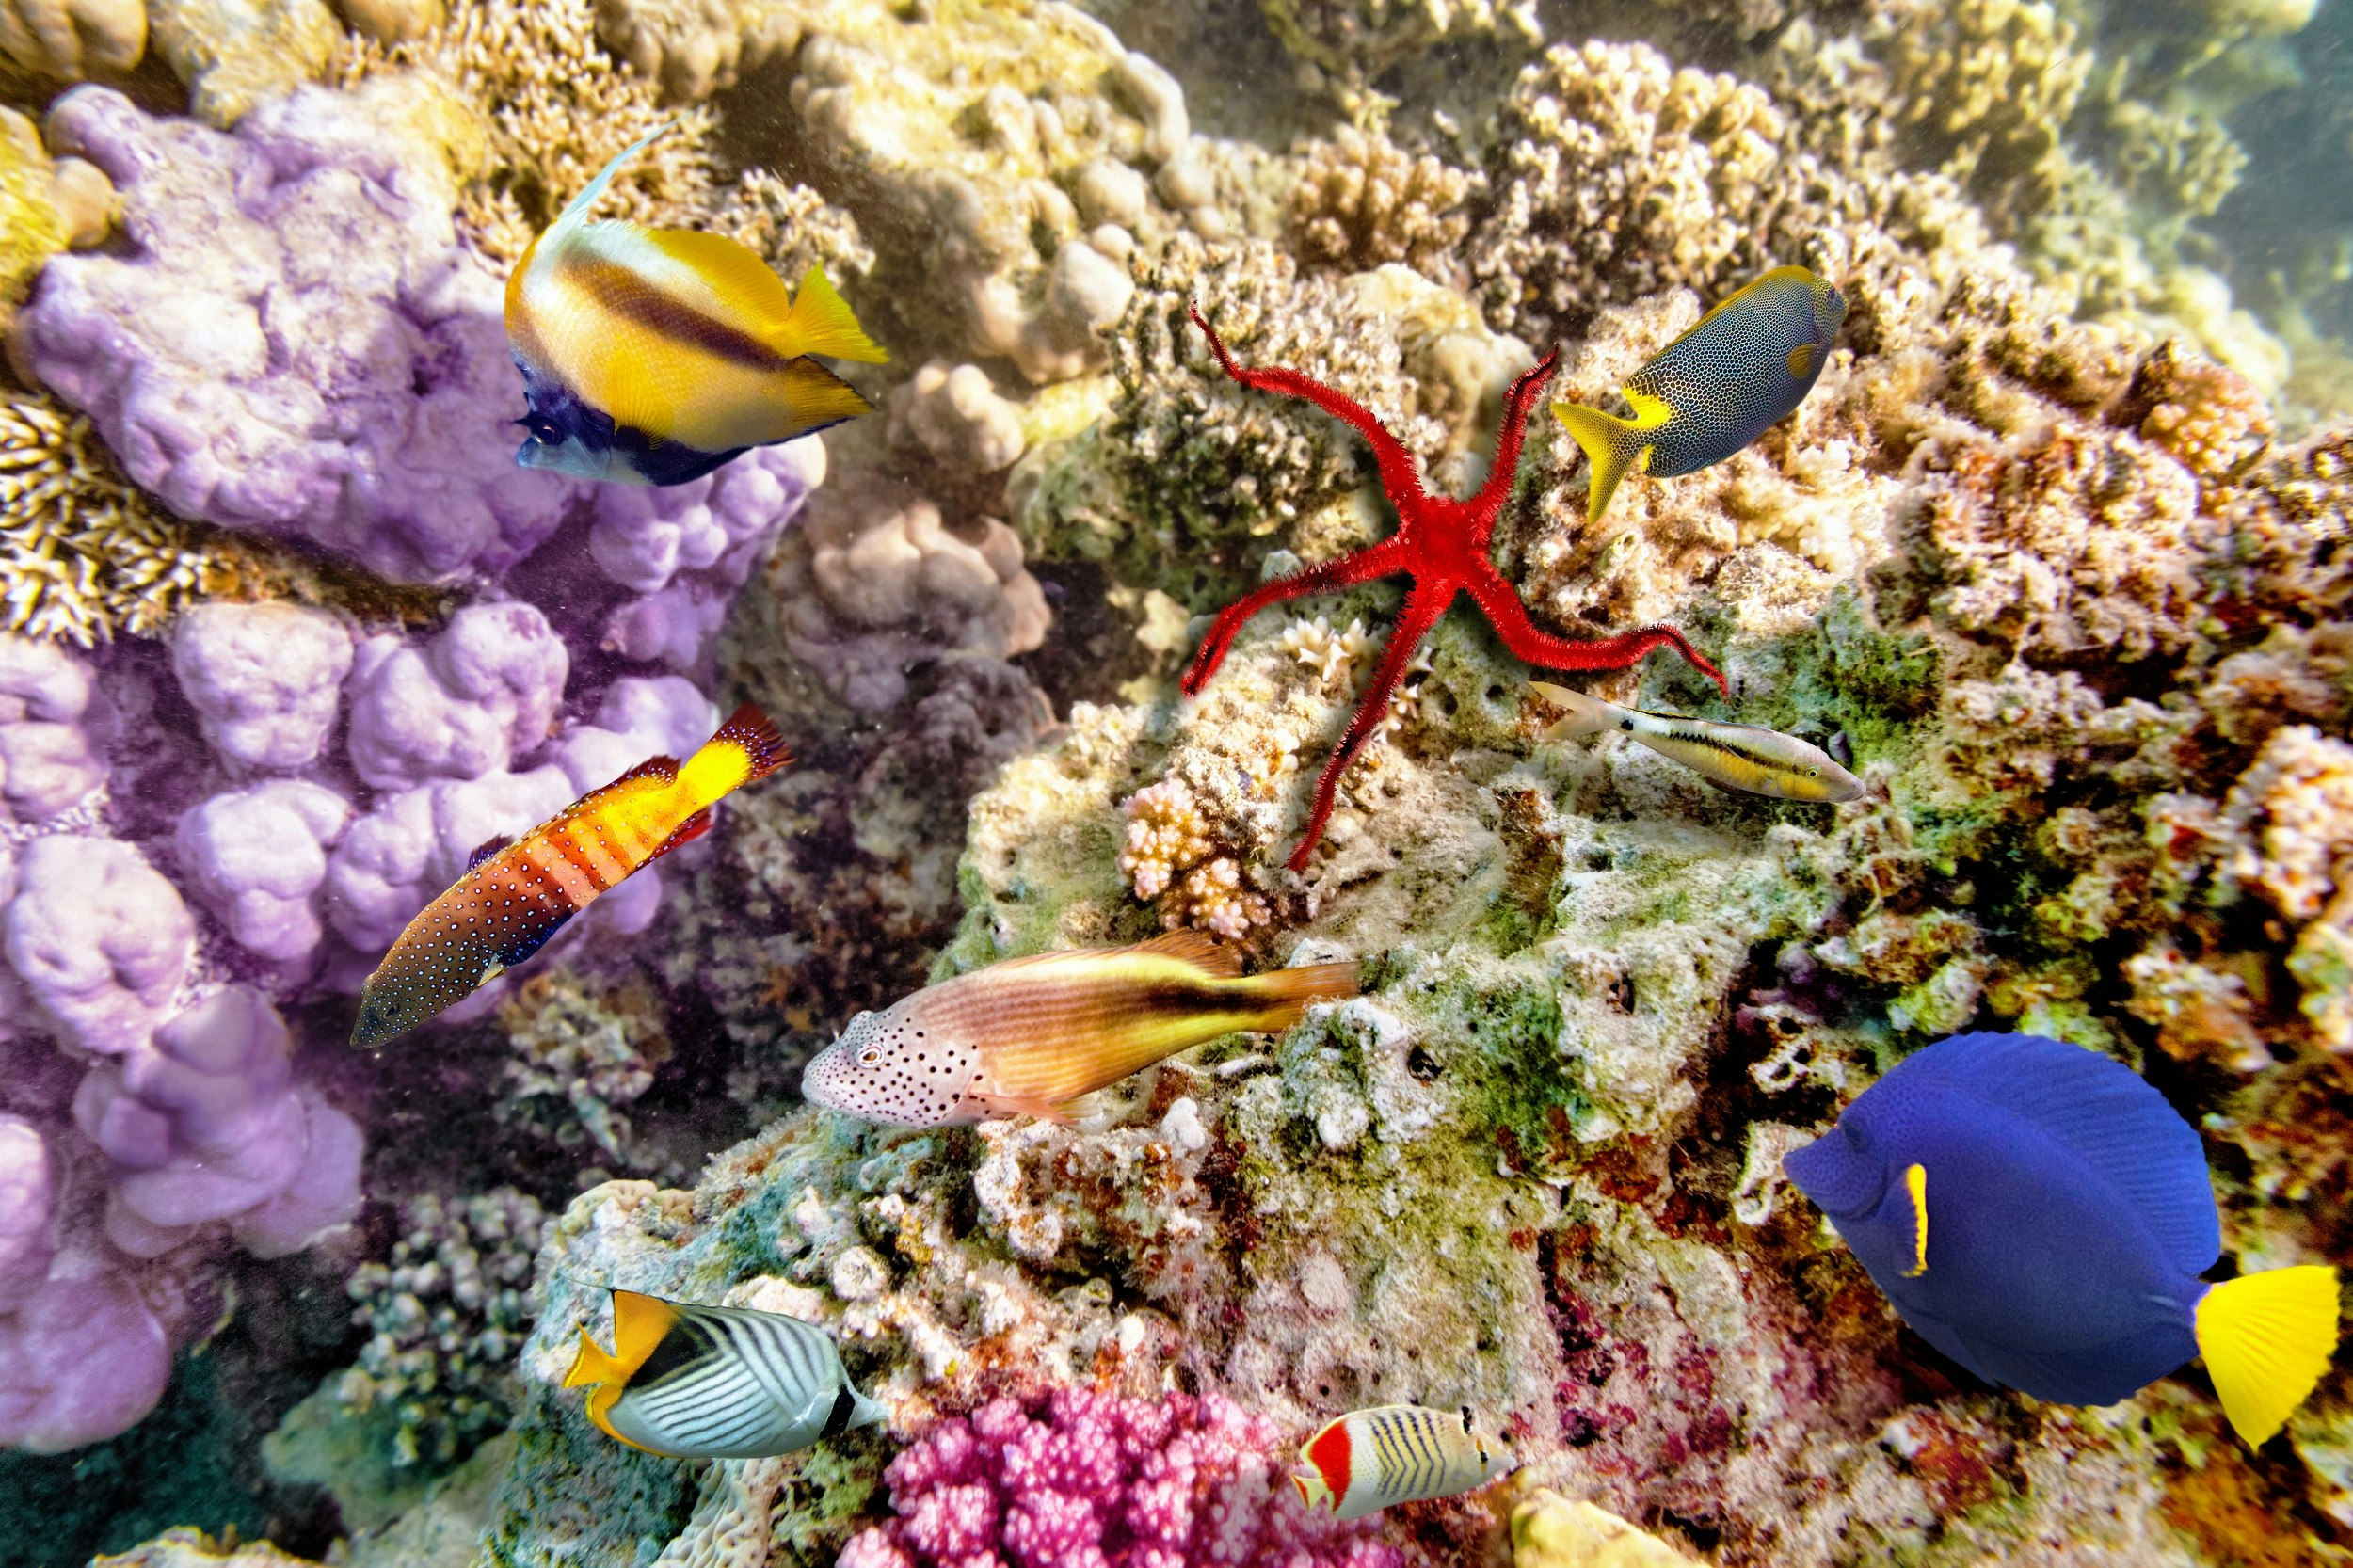 A close-up shot of colourful coral of varied shapes. Several different tropical fish are moving near the reef, with a large red starfish in the centre